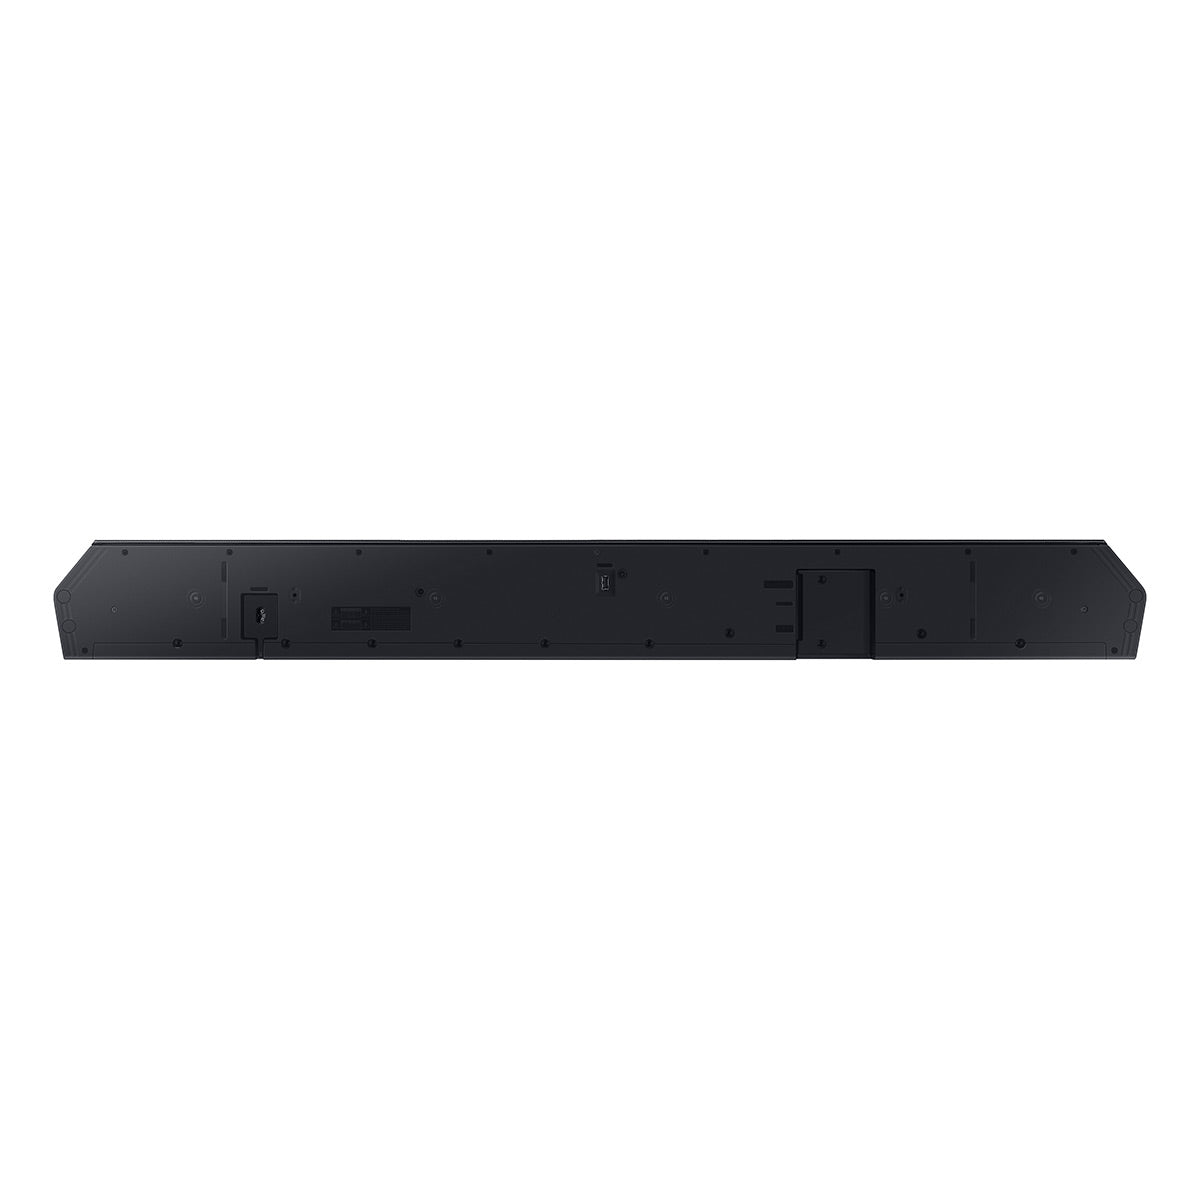 Samsung HW-Q910D 9.1.2-Channel Wireless Dolby Atmos Soundbar with Wireless Surround Speakers & Subwoofer